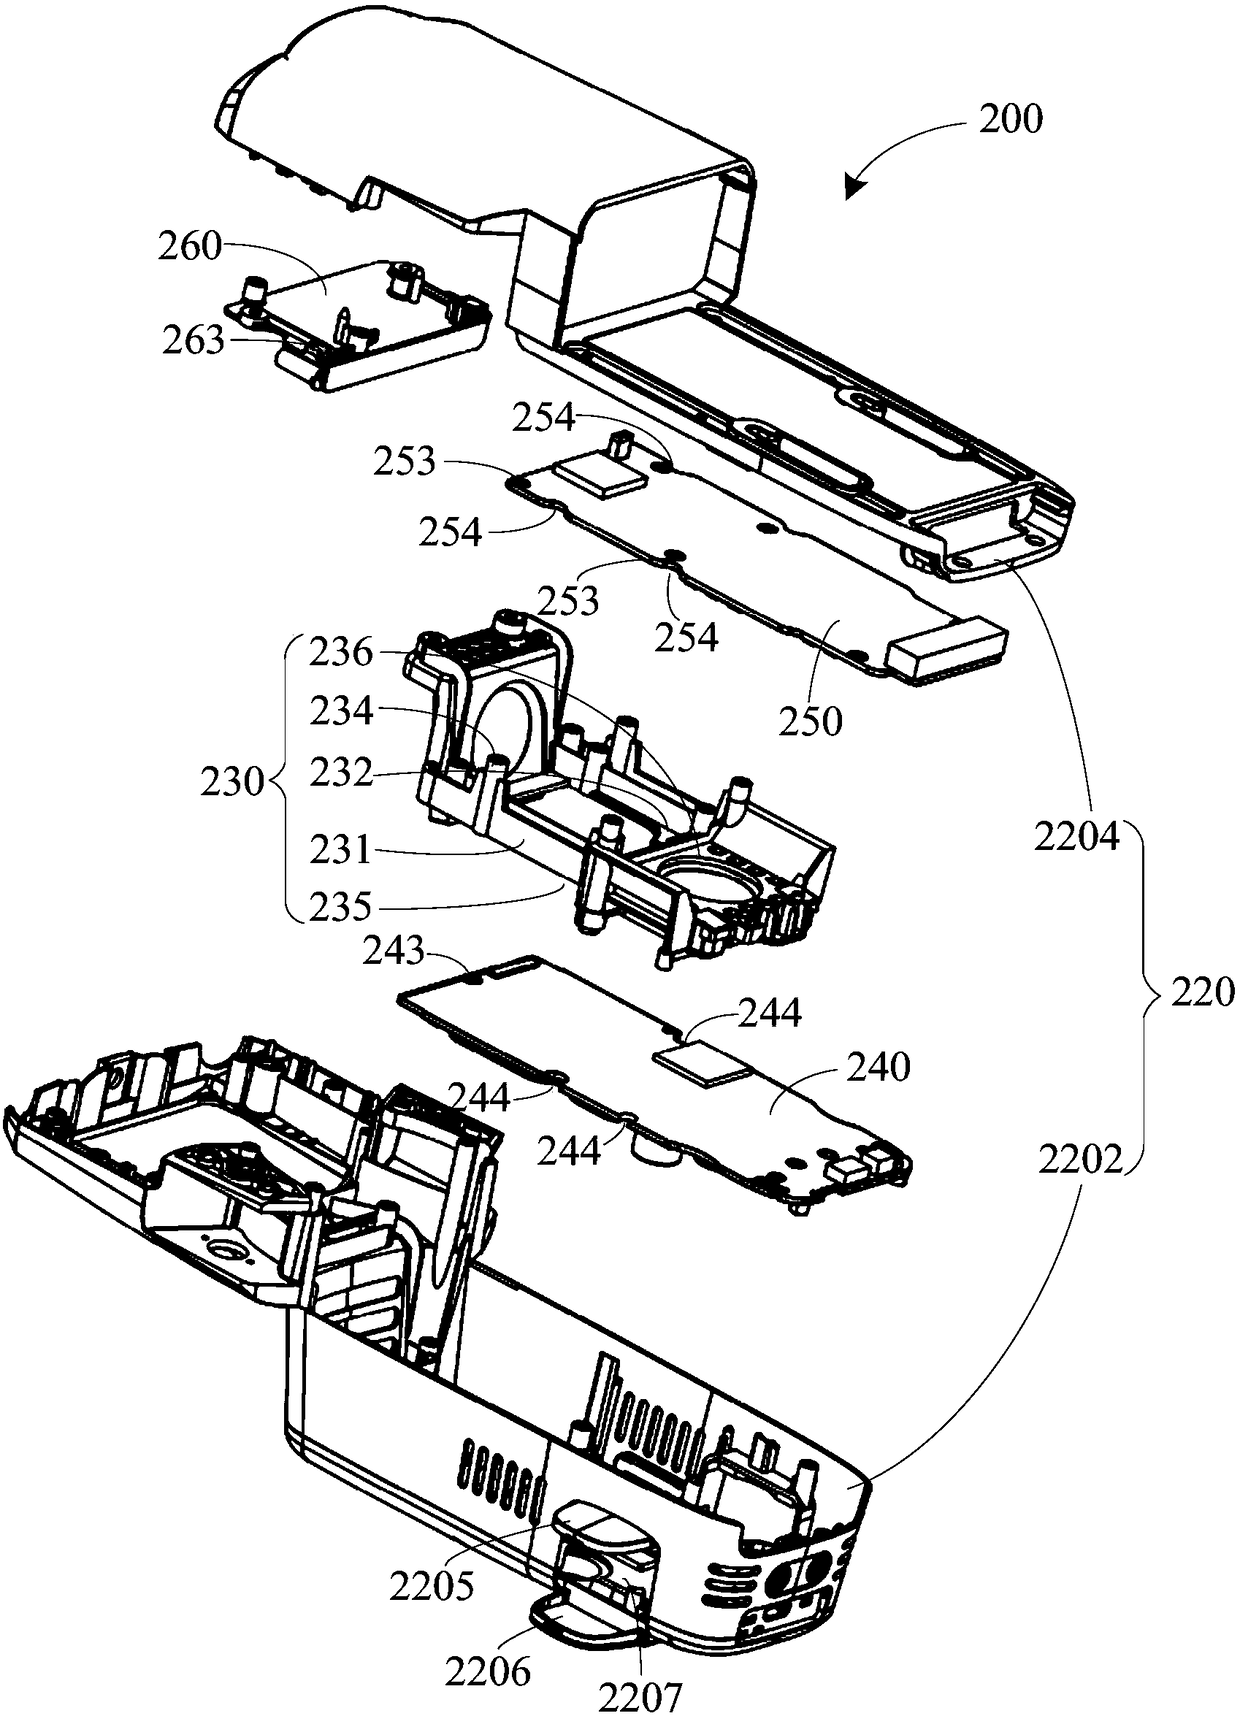 Unmanned aerial vehicle and fuselage assembly thereof